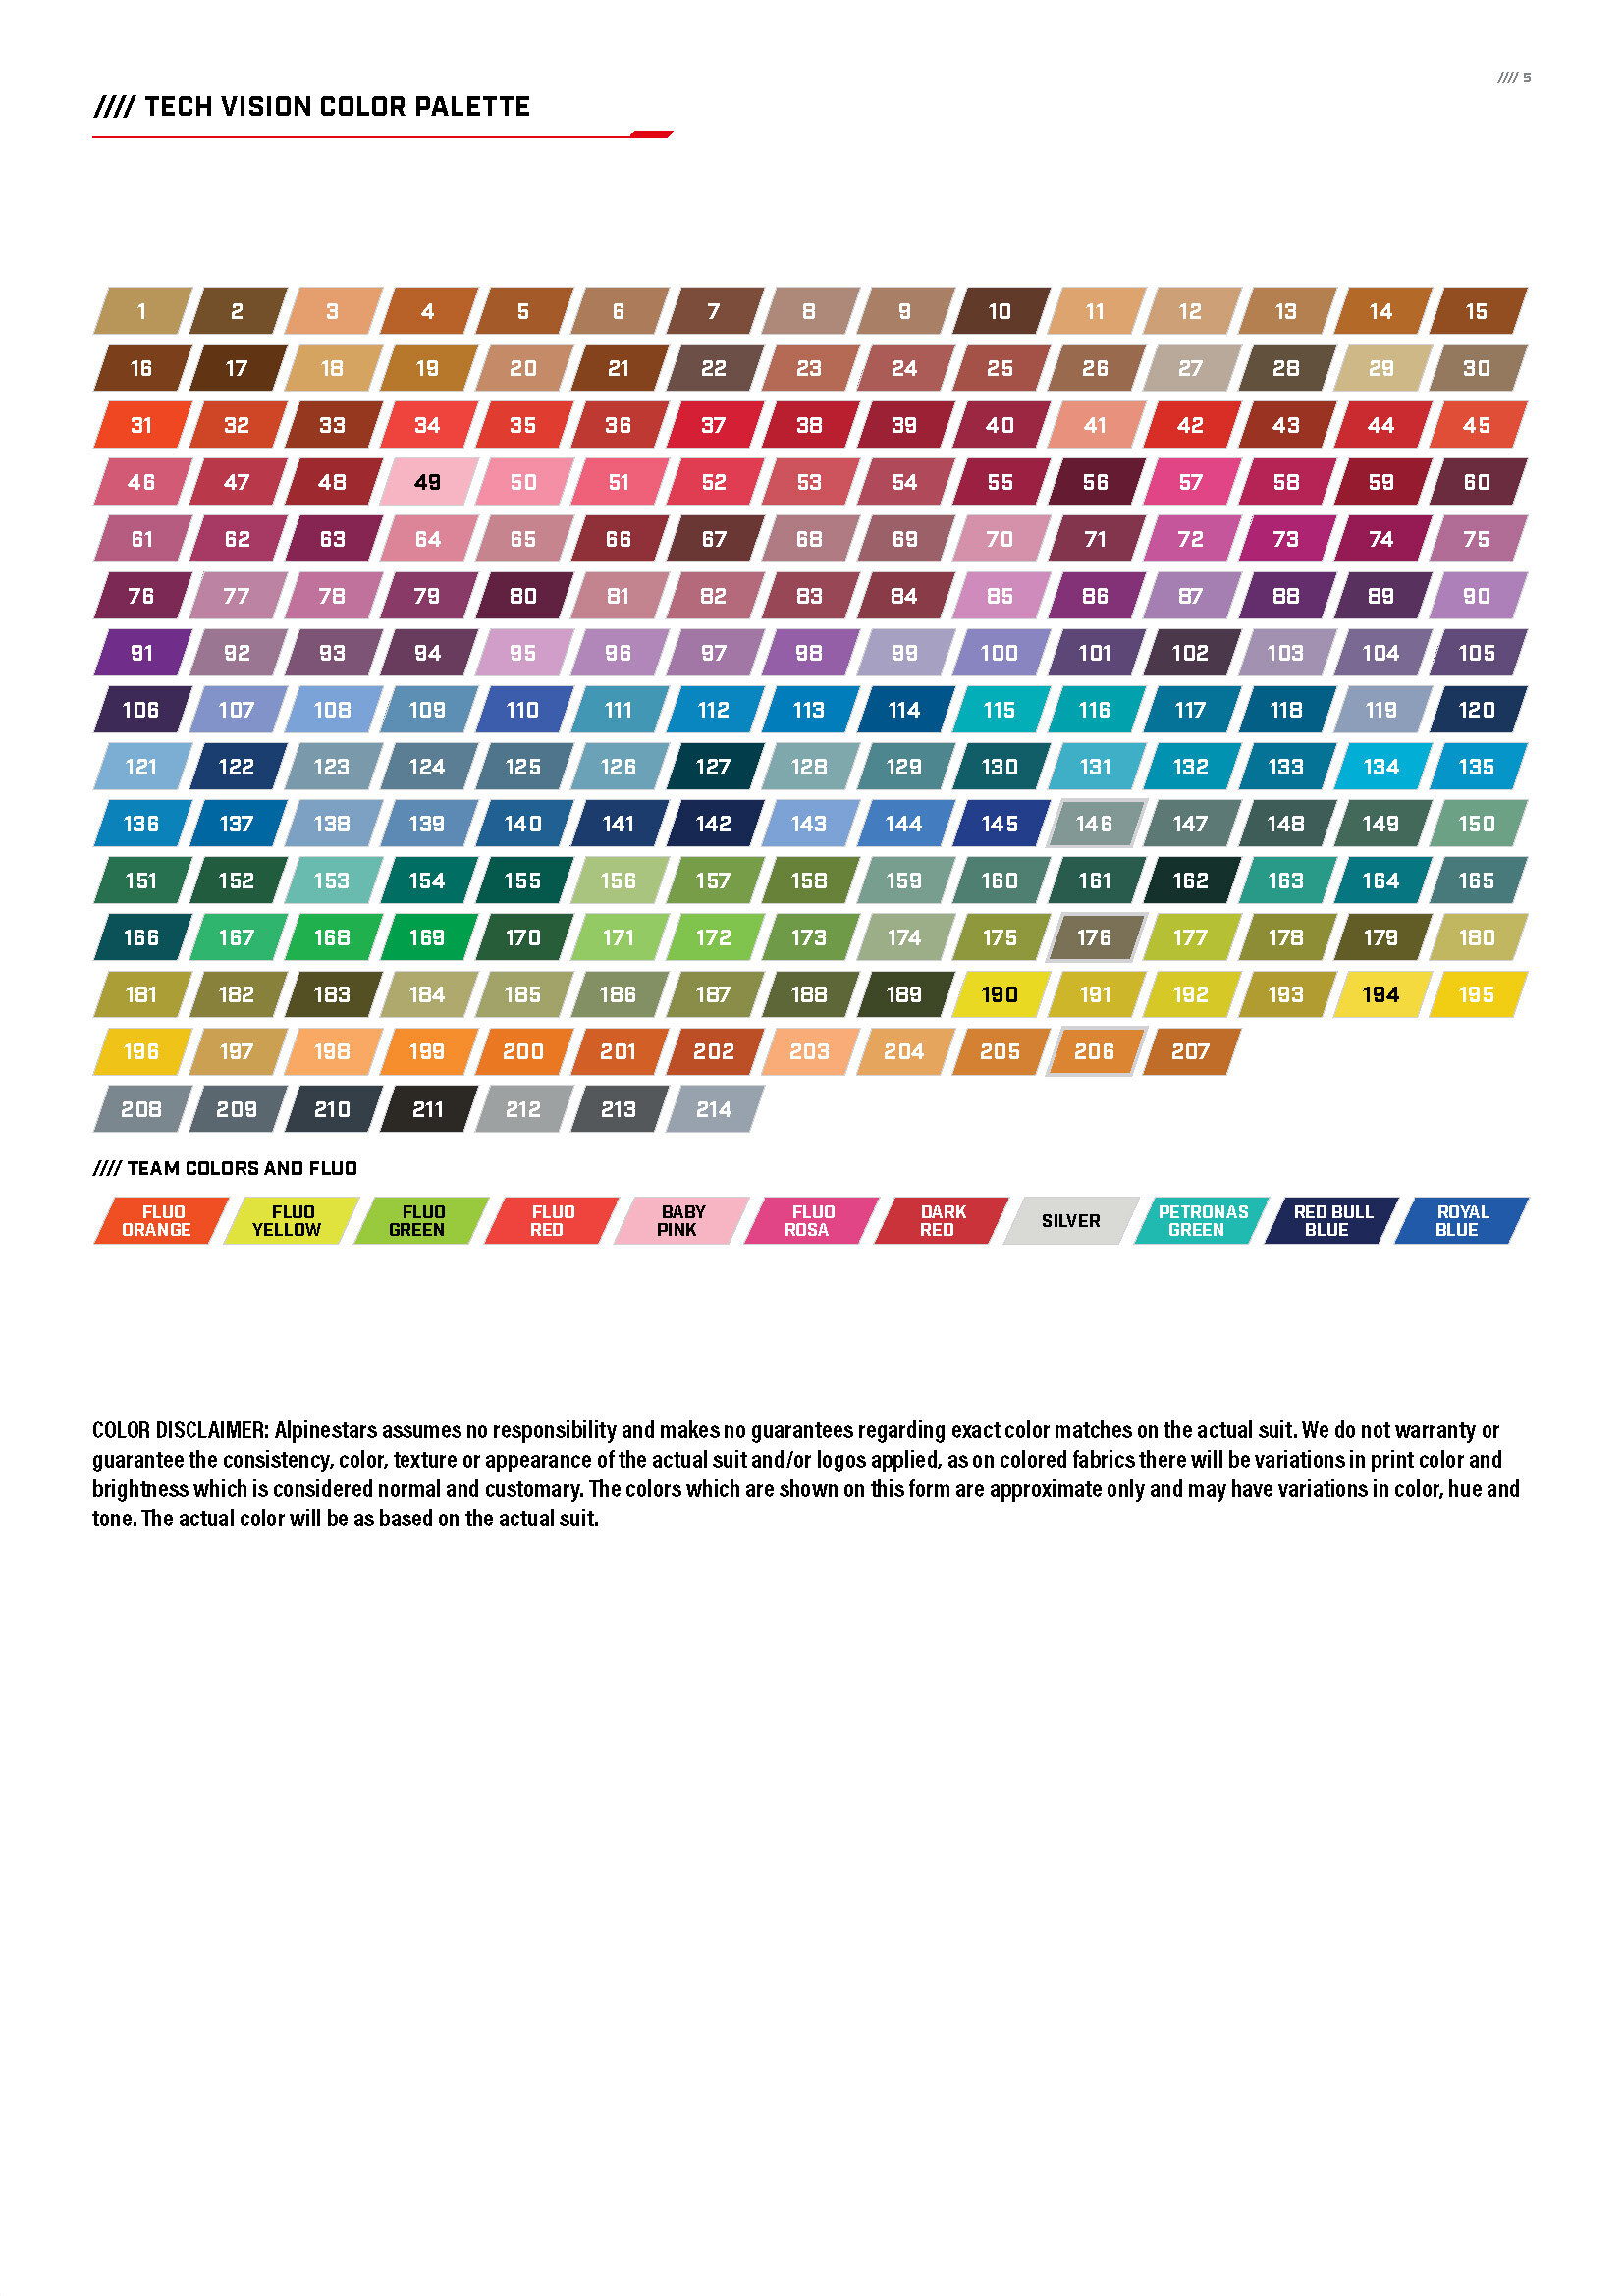 Alpinestars Color Chart for Tech Vision